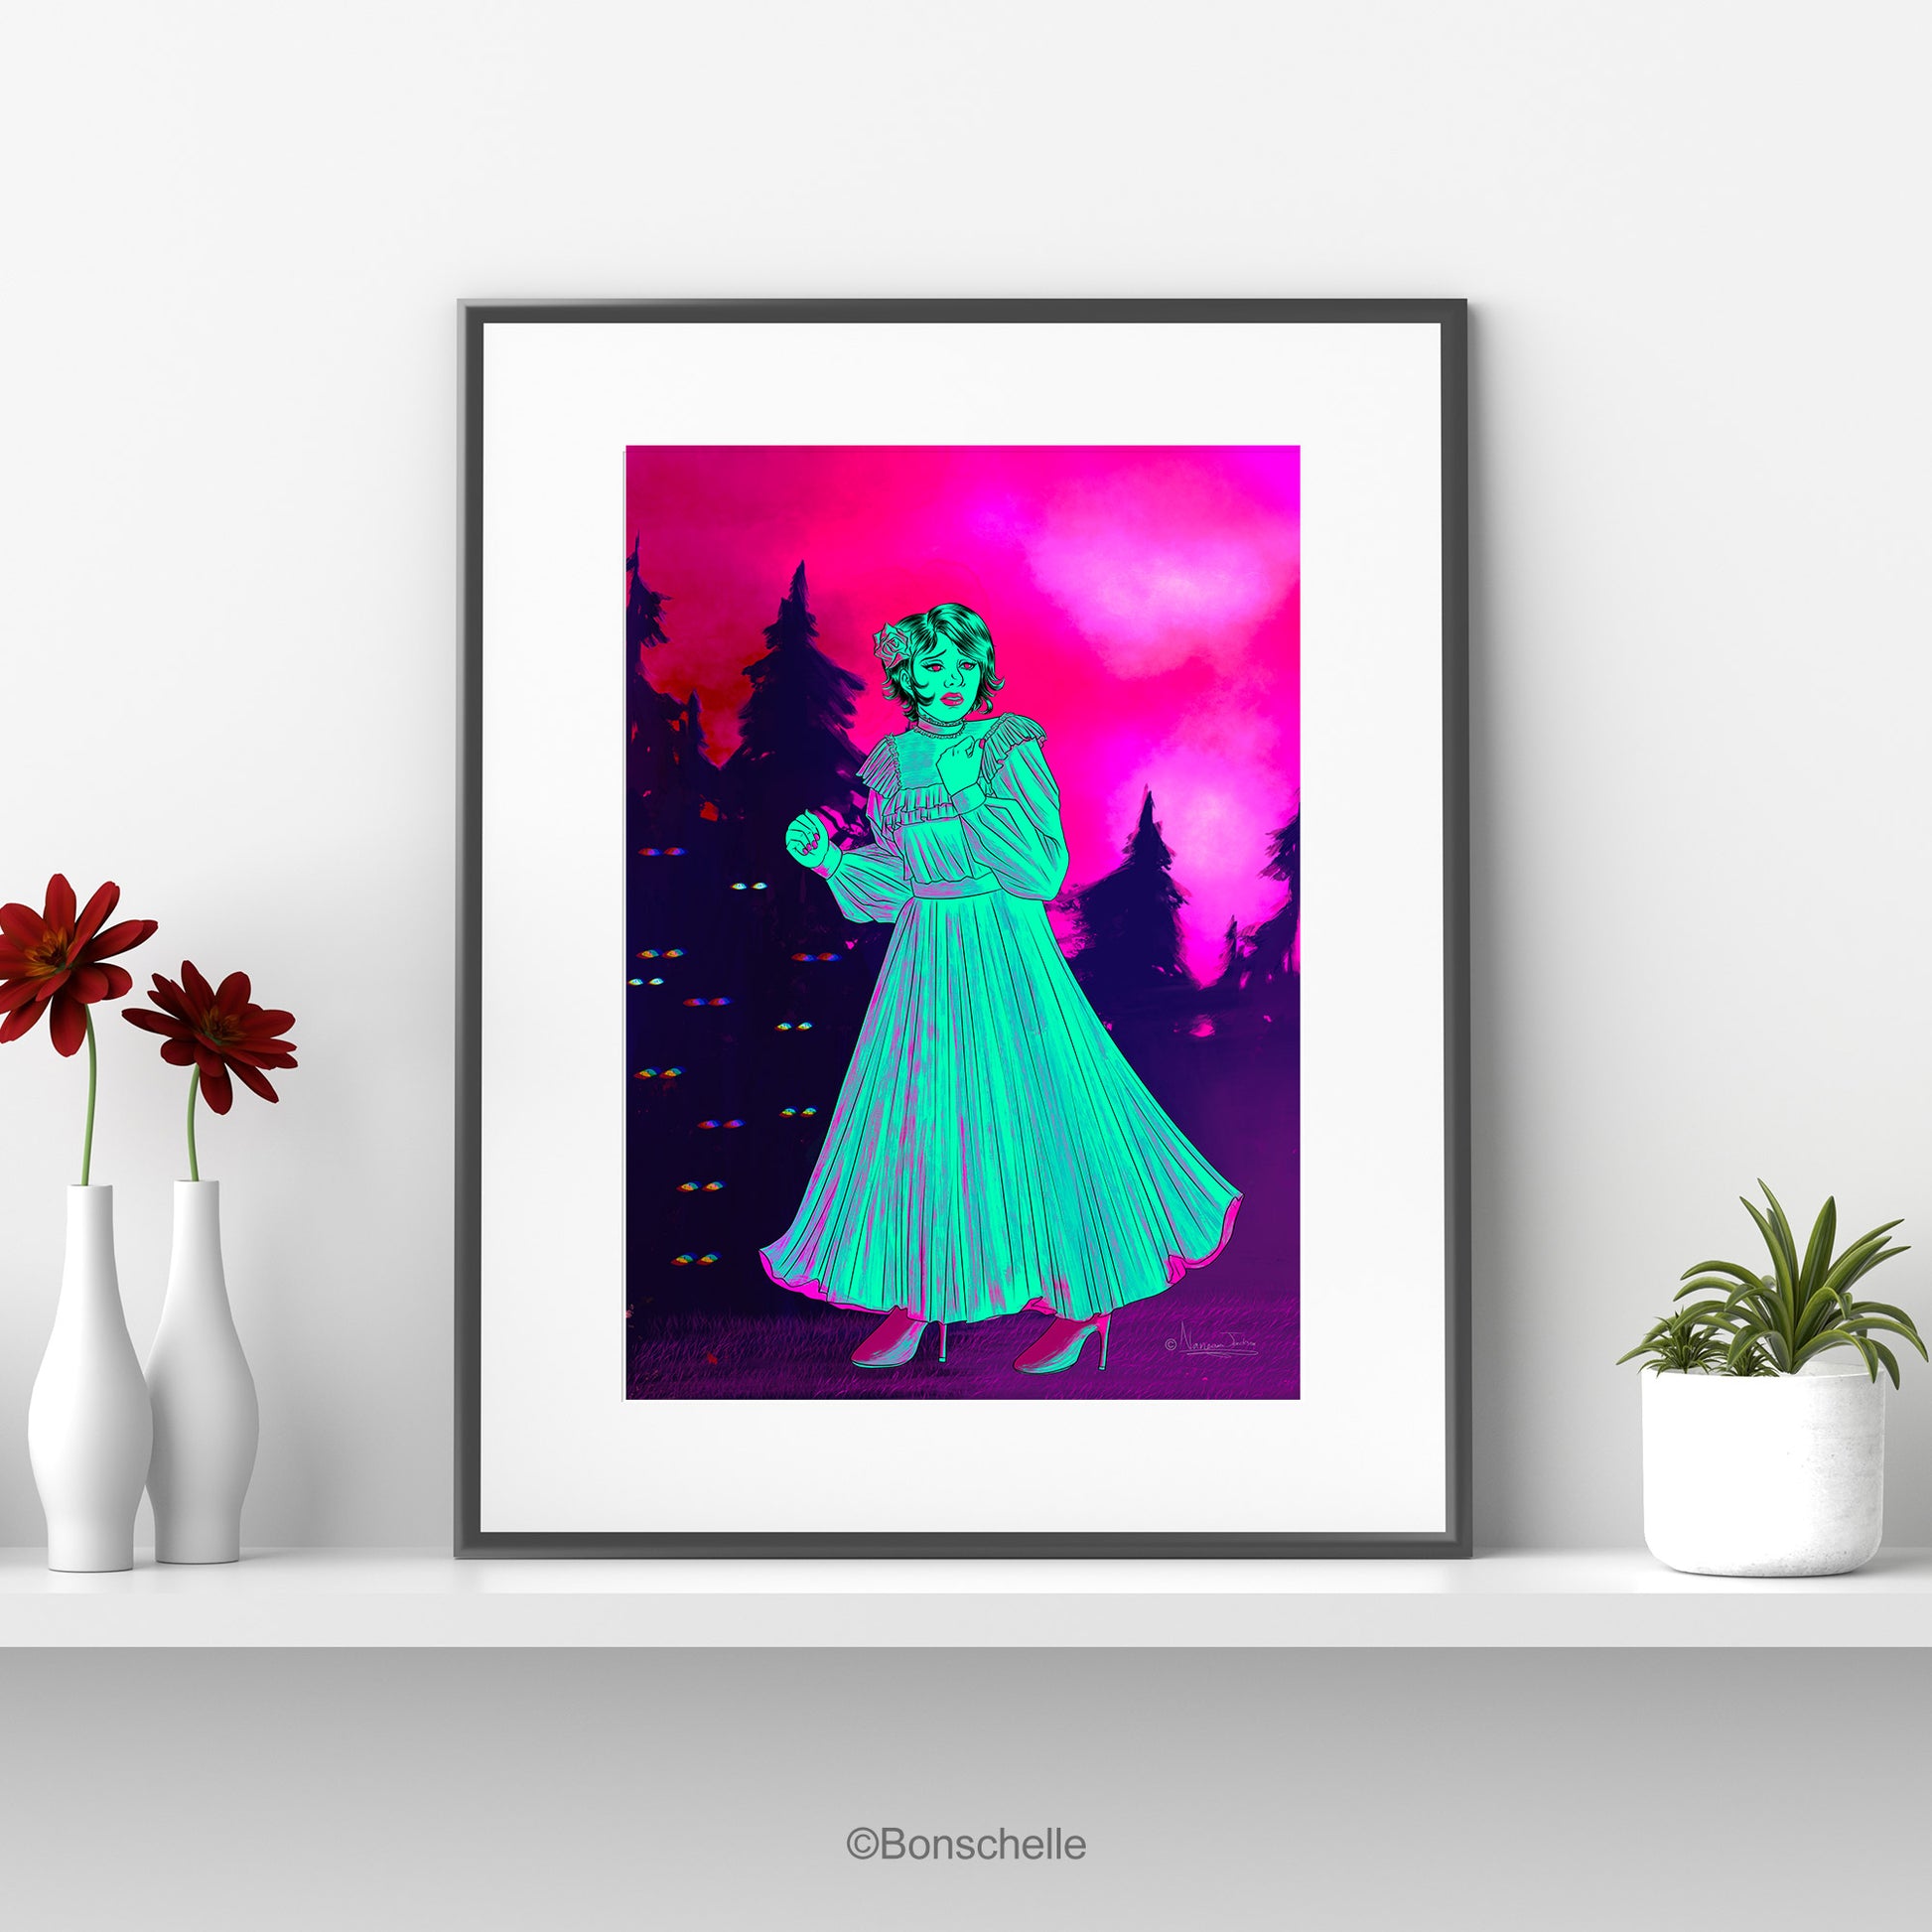 Maiden Lost In The Woods Neon Gothic Digital Art Poster Print shwon framed on a shelf